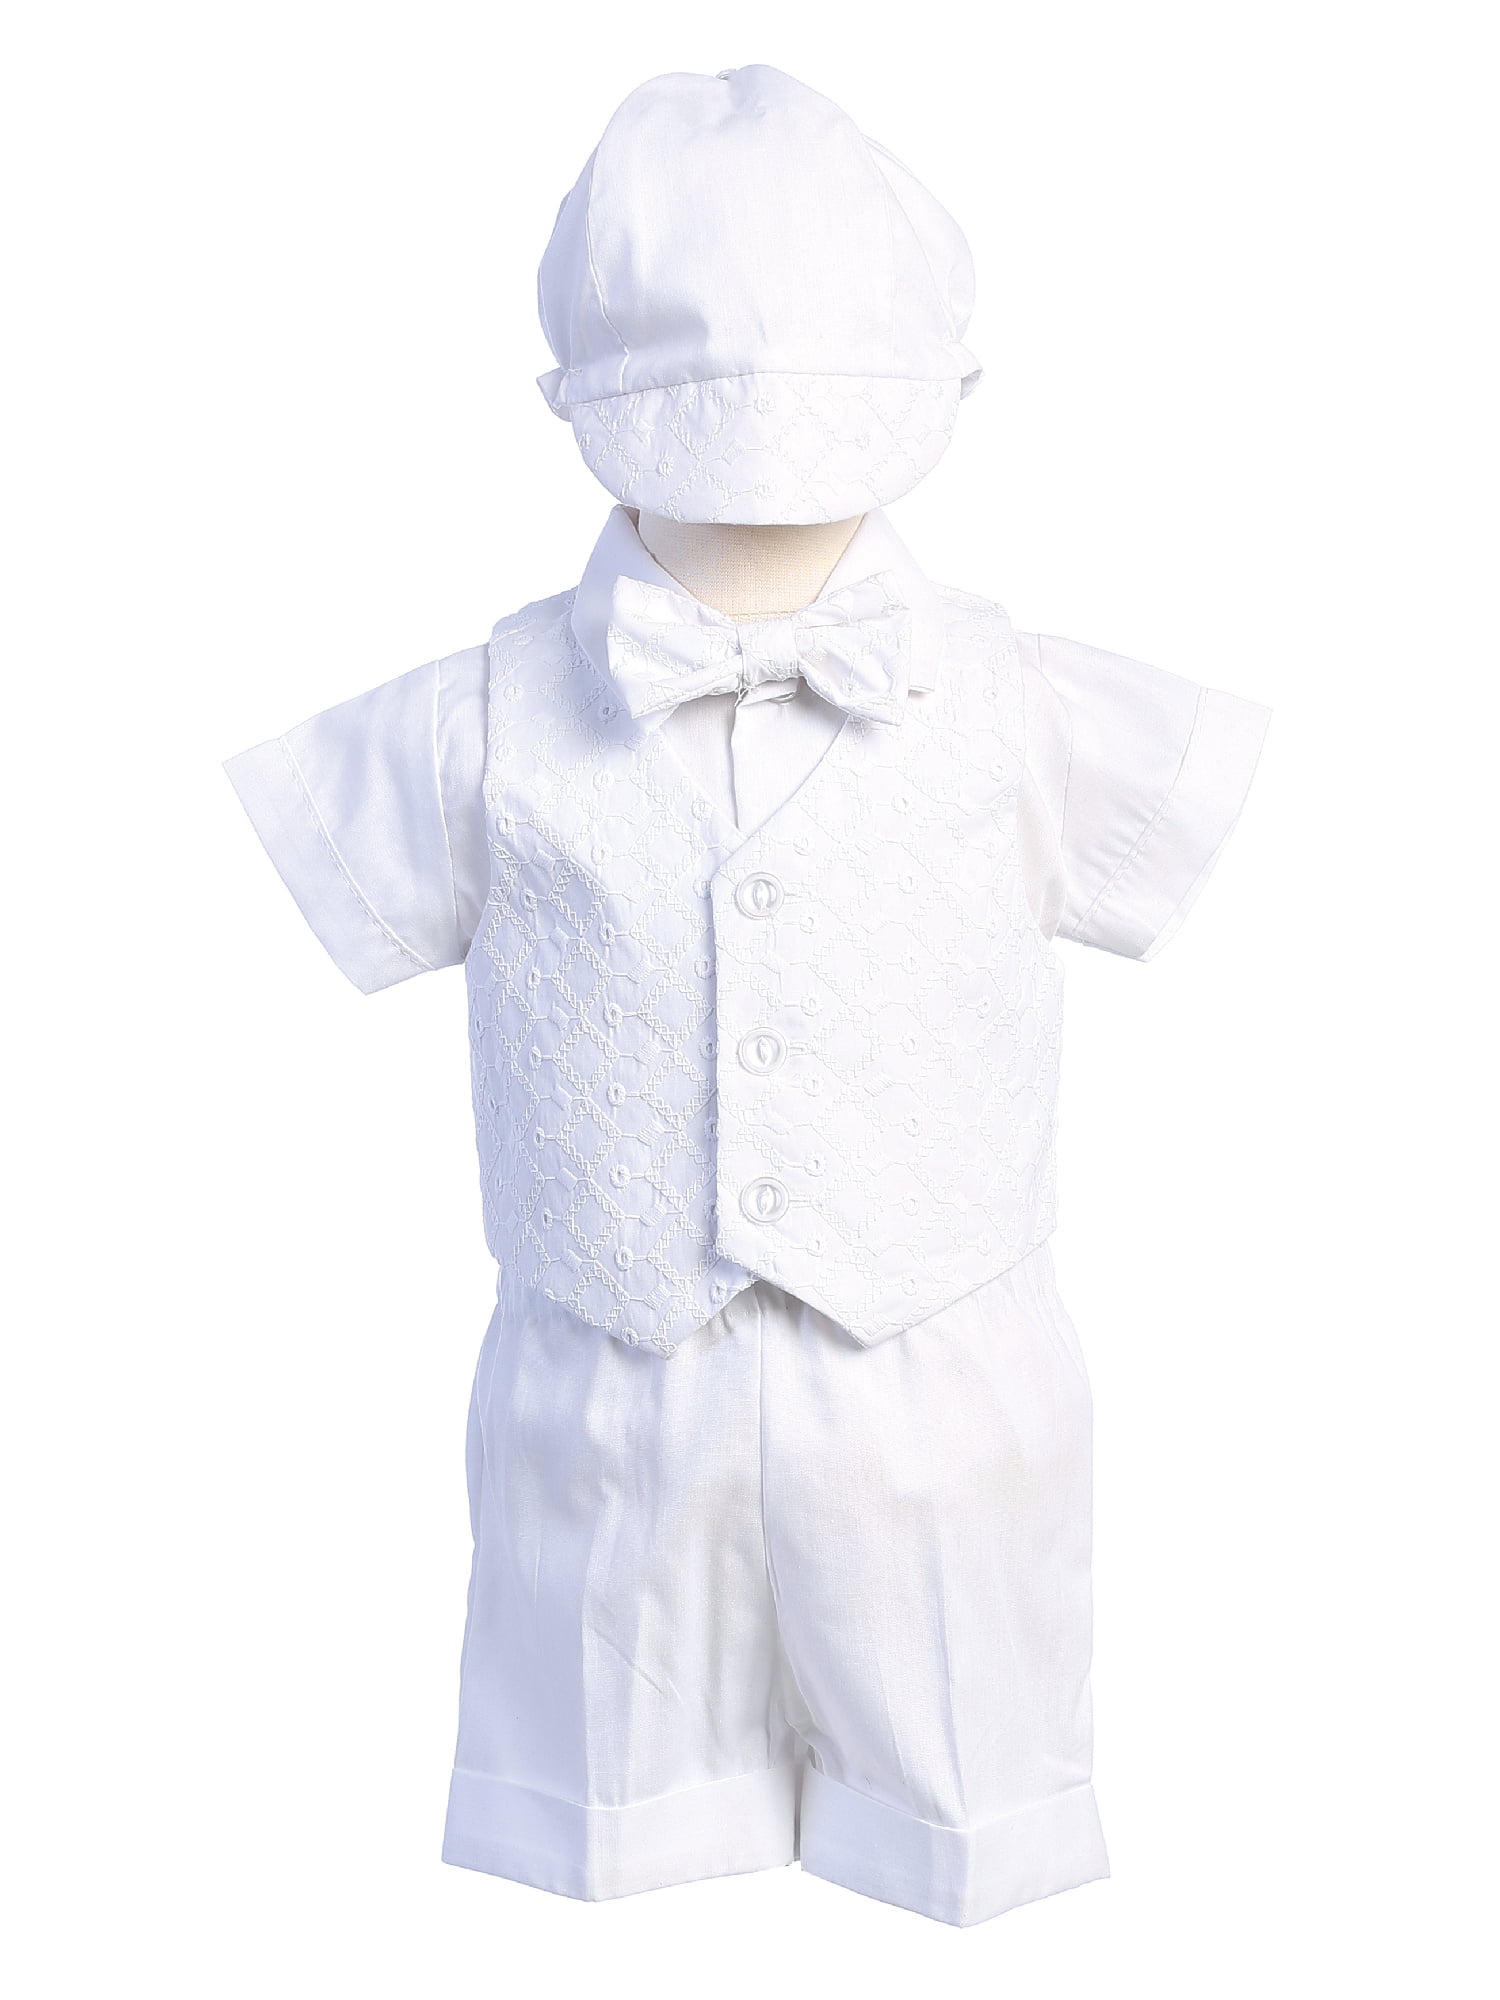 Lito Angels Baby Boys White Suit Christening Clothing Baptism Outfits with Bonnet Long Sleeve Check